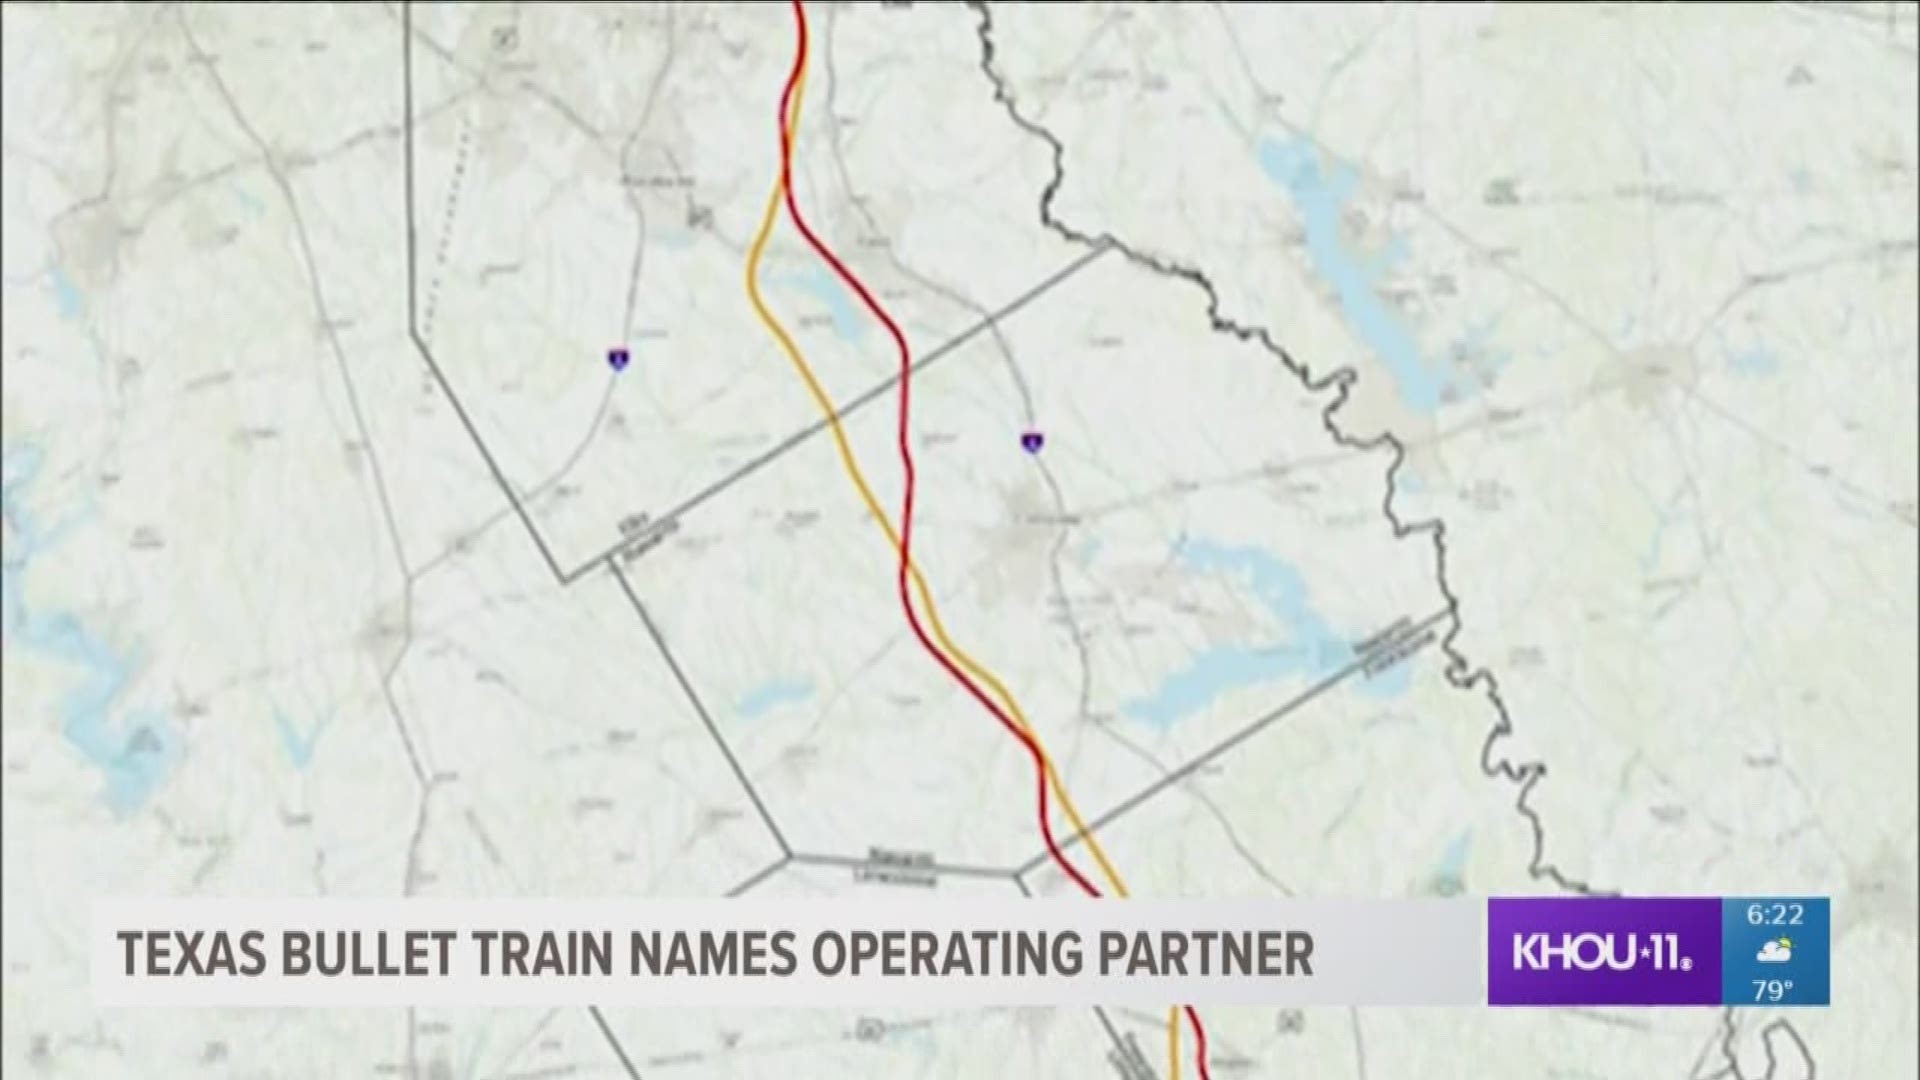 The Texas high-speed rail is one step closer to development. Today, the company announced an operating partner, a Spanish firm that runs high-speed trains in Europe.